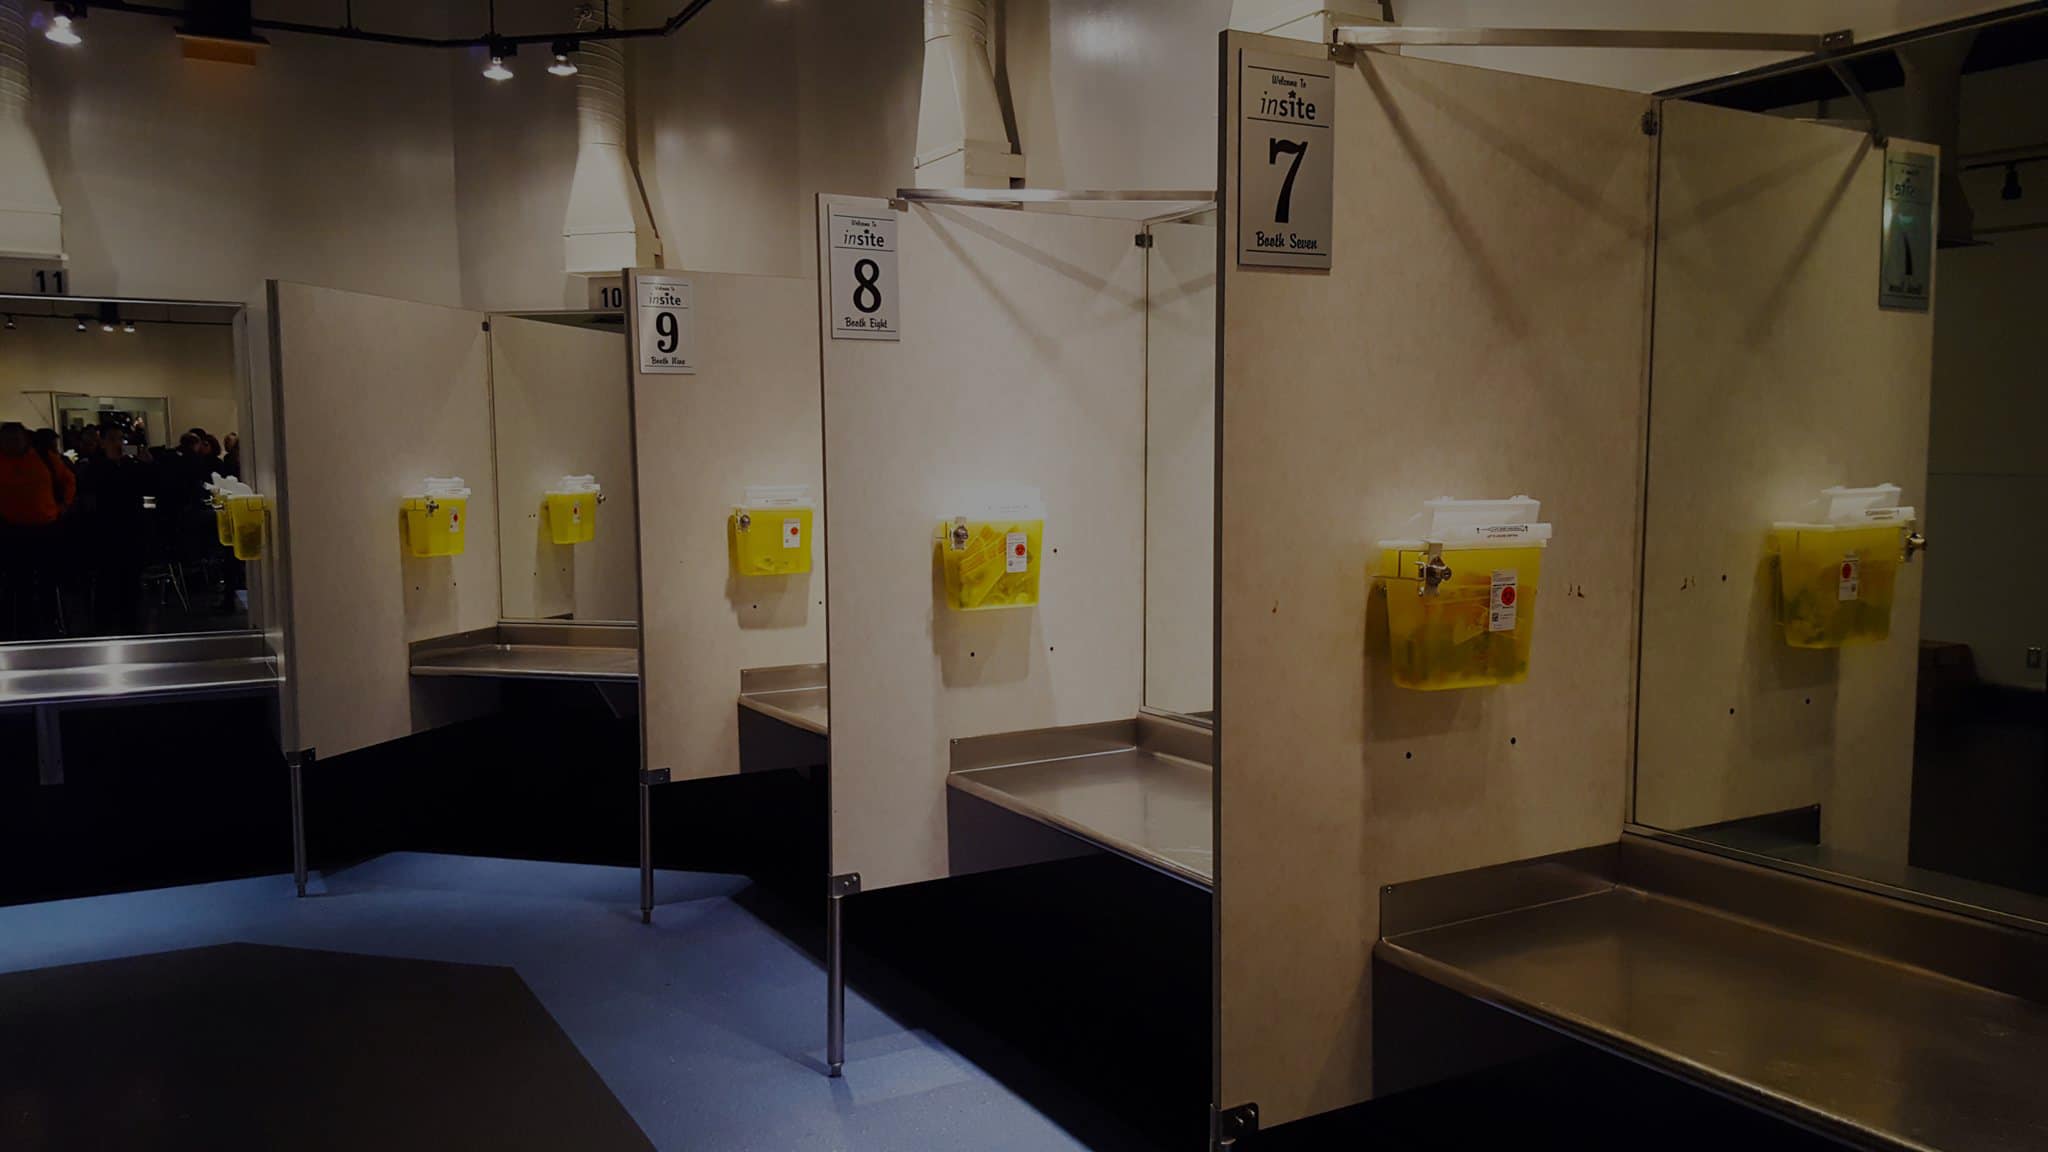 Stalls inside Insite supervised injection site | how harm reduction saved my life